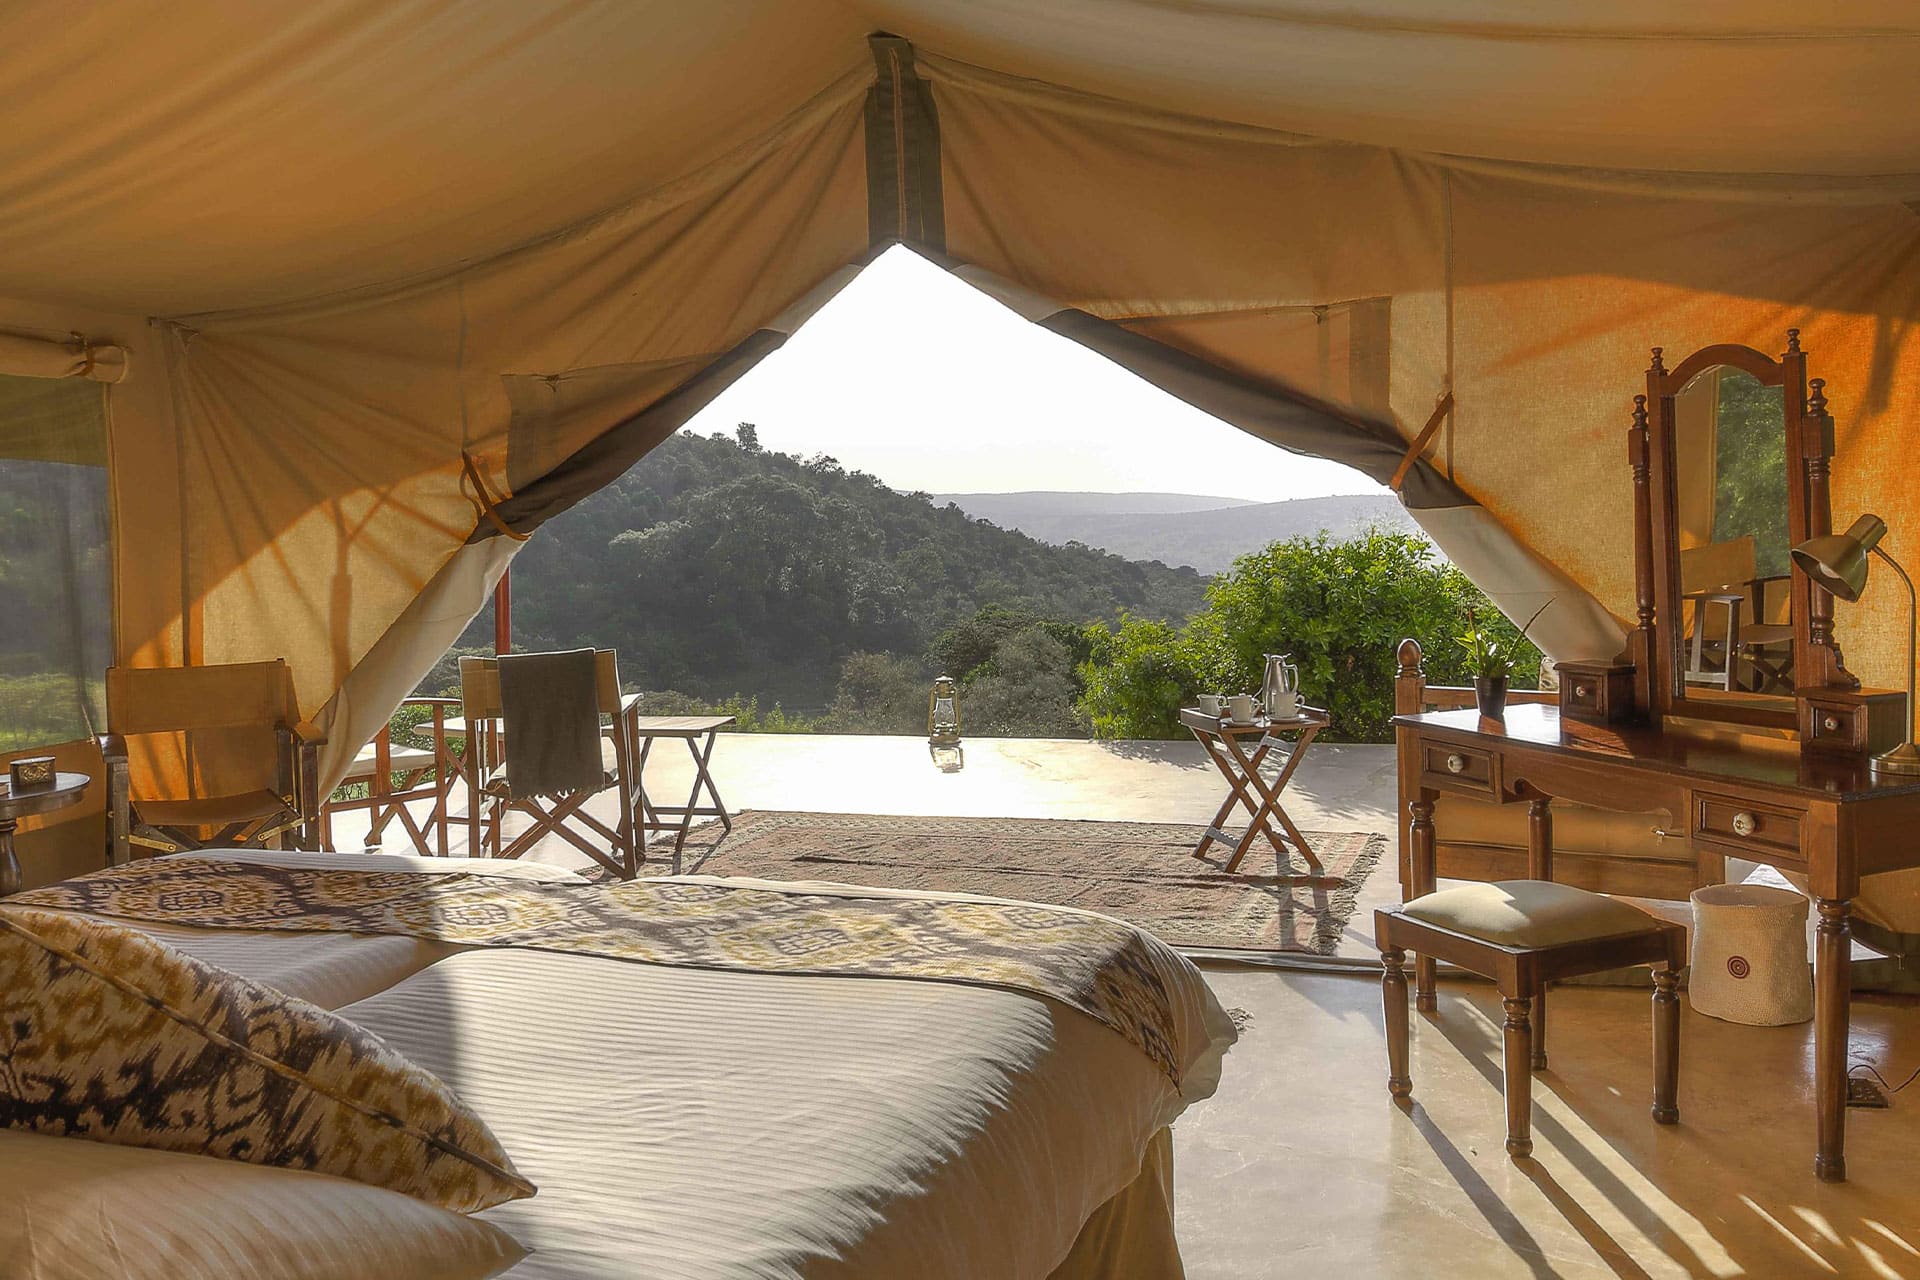 A bedroom looking out over a valley at Entumoto Safari Camp